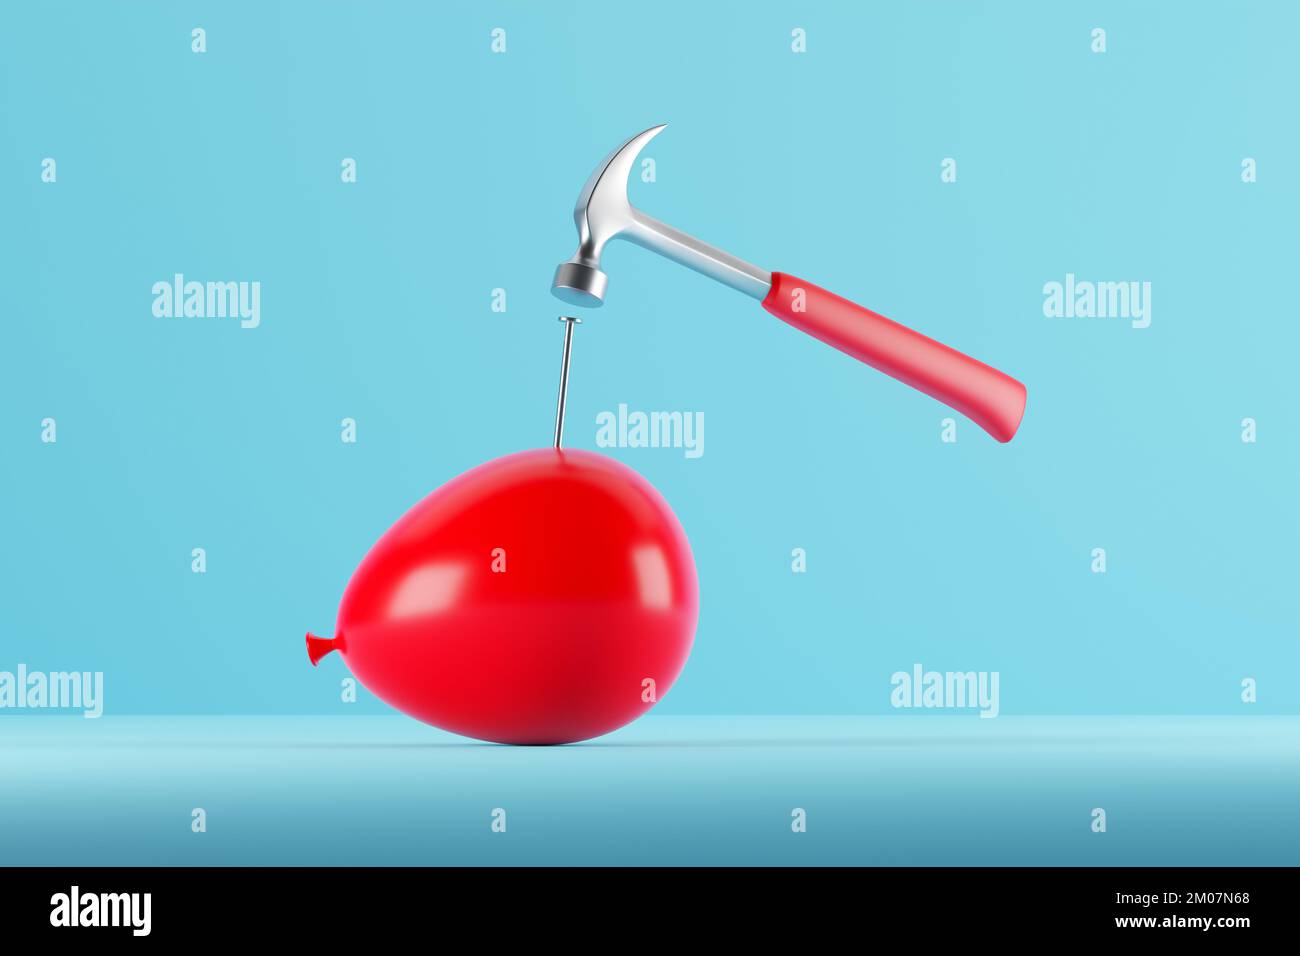 Danger, risk, tension, pressure, threat or bursting the bubble concepts. Hammer and nail is about to burst a red balloon. 3D render. Stock Photo